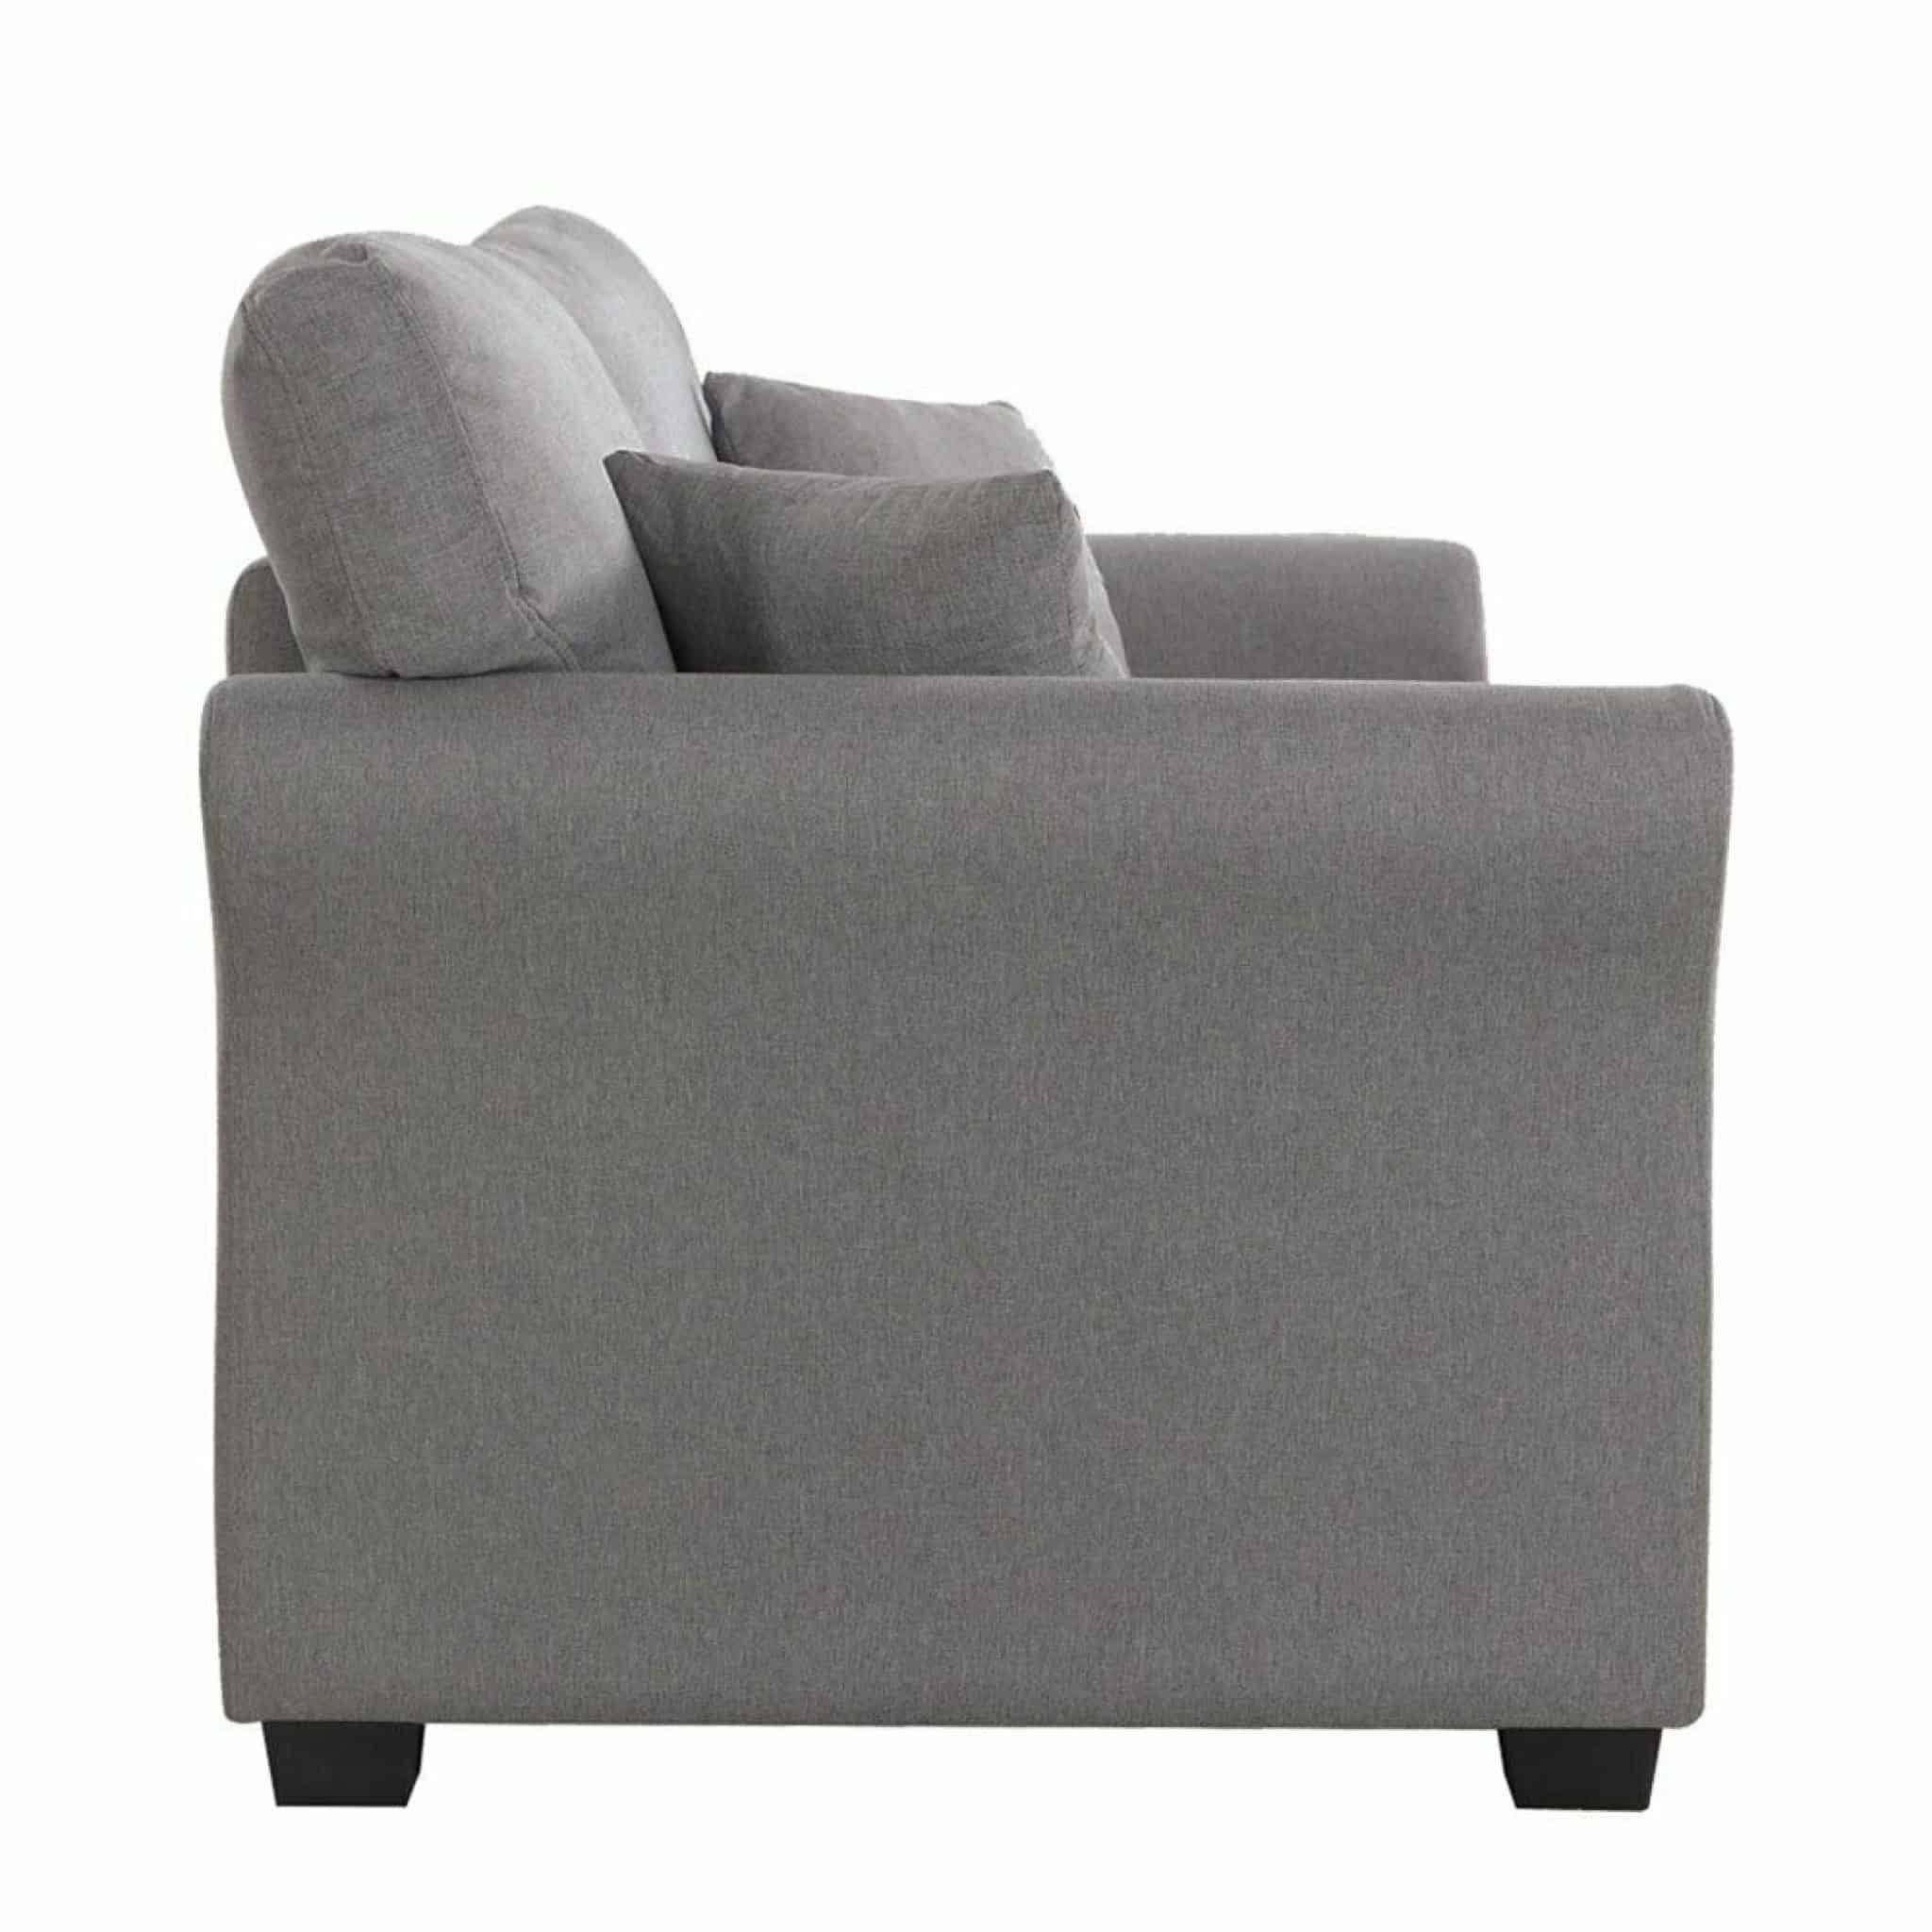 63" Bluish Grey Cozy Loveseat Sofa W/ 2 Accent Pillows – Affordable For Sofas In Bluish Grey (View 16 of 20)